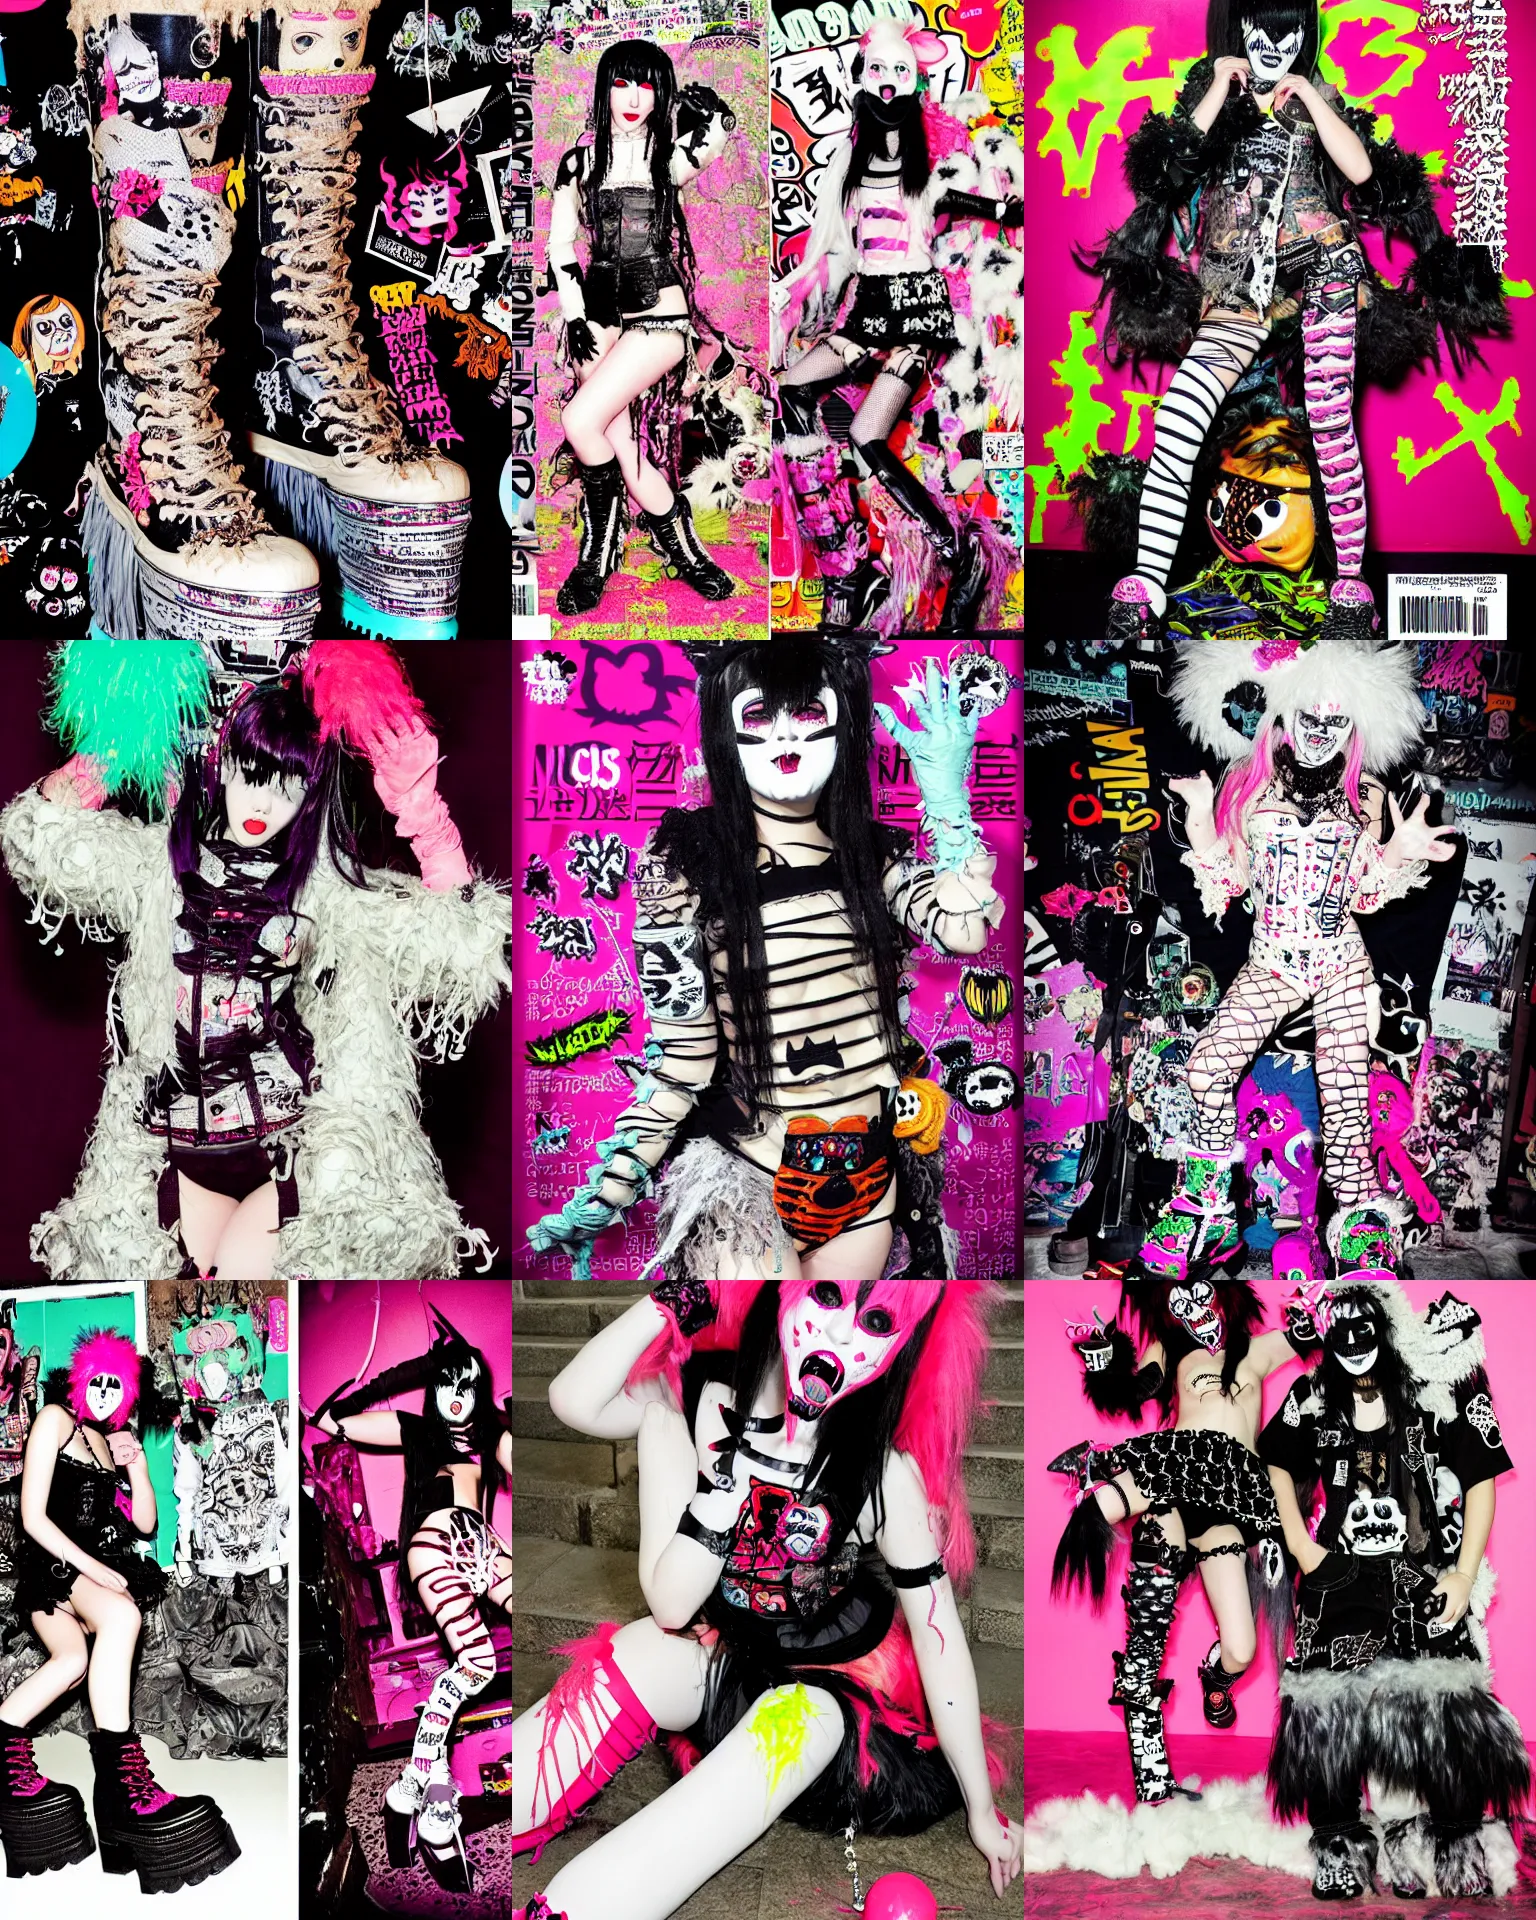 Prompt: photo of lace monster wearing ripped up dirty Swear kiss monster teeth yeti platform boots in the style of 1990's FRUiTS magazine by 20471120 in japan and in the style Rammellzee in the style of Ai Yazawa's Nana fashion by Gothic & Lolita Bible magazine and the style of CyberDog by Insane Clown Posse and emo scene style by Ryan Trecartin in the style of Dorian Electra by Rick Owens Undercover by Jun Takahashi in a dirty dark dark dark poorly lit bedroom full of trash and garbage server racks and cables everywhere in the style of Juergen Teller in the style of Shoichi Aoki, japanese street fashion, KEROUAC magazine, Walter Van Beirendonck W&LT 1990's, Milk Bar Magazine, Vivienne Westwood, y2K aesthetic